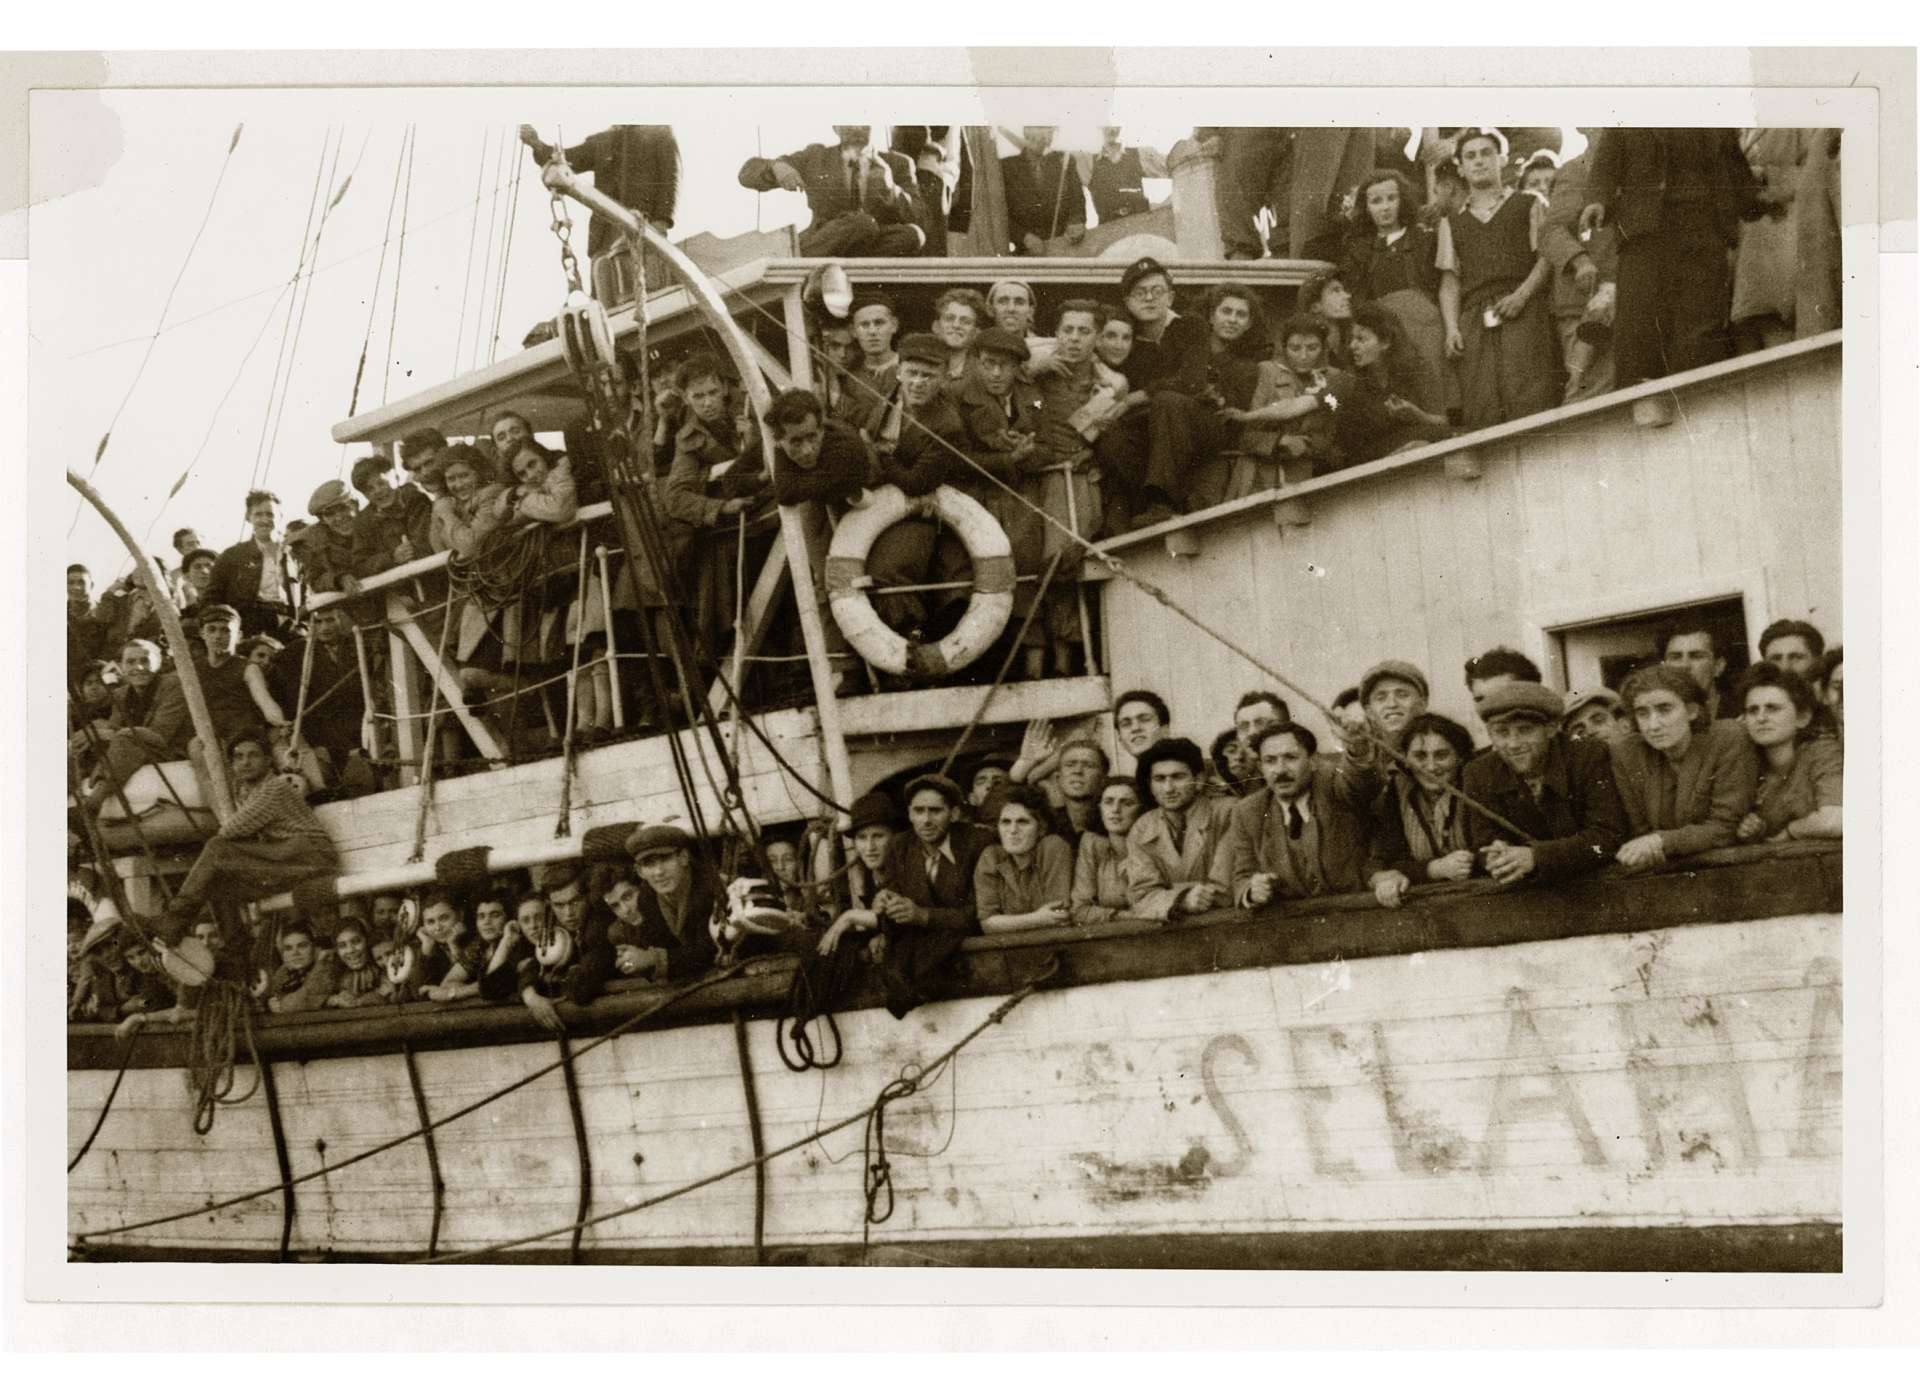 Hundreds of Romanian and Bulgarian Jewish passengers hang off the sides of the Selahattin, as the boat reaches Istanbul. They were among the 8,000 refugees who transited through Turkey to Palestine in 1944. Courtesy of the Franklin D. Roosevelt Presidential Library and Museum, Hyde Park, New York